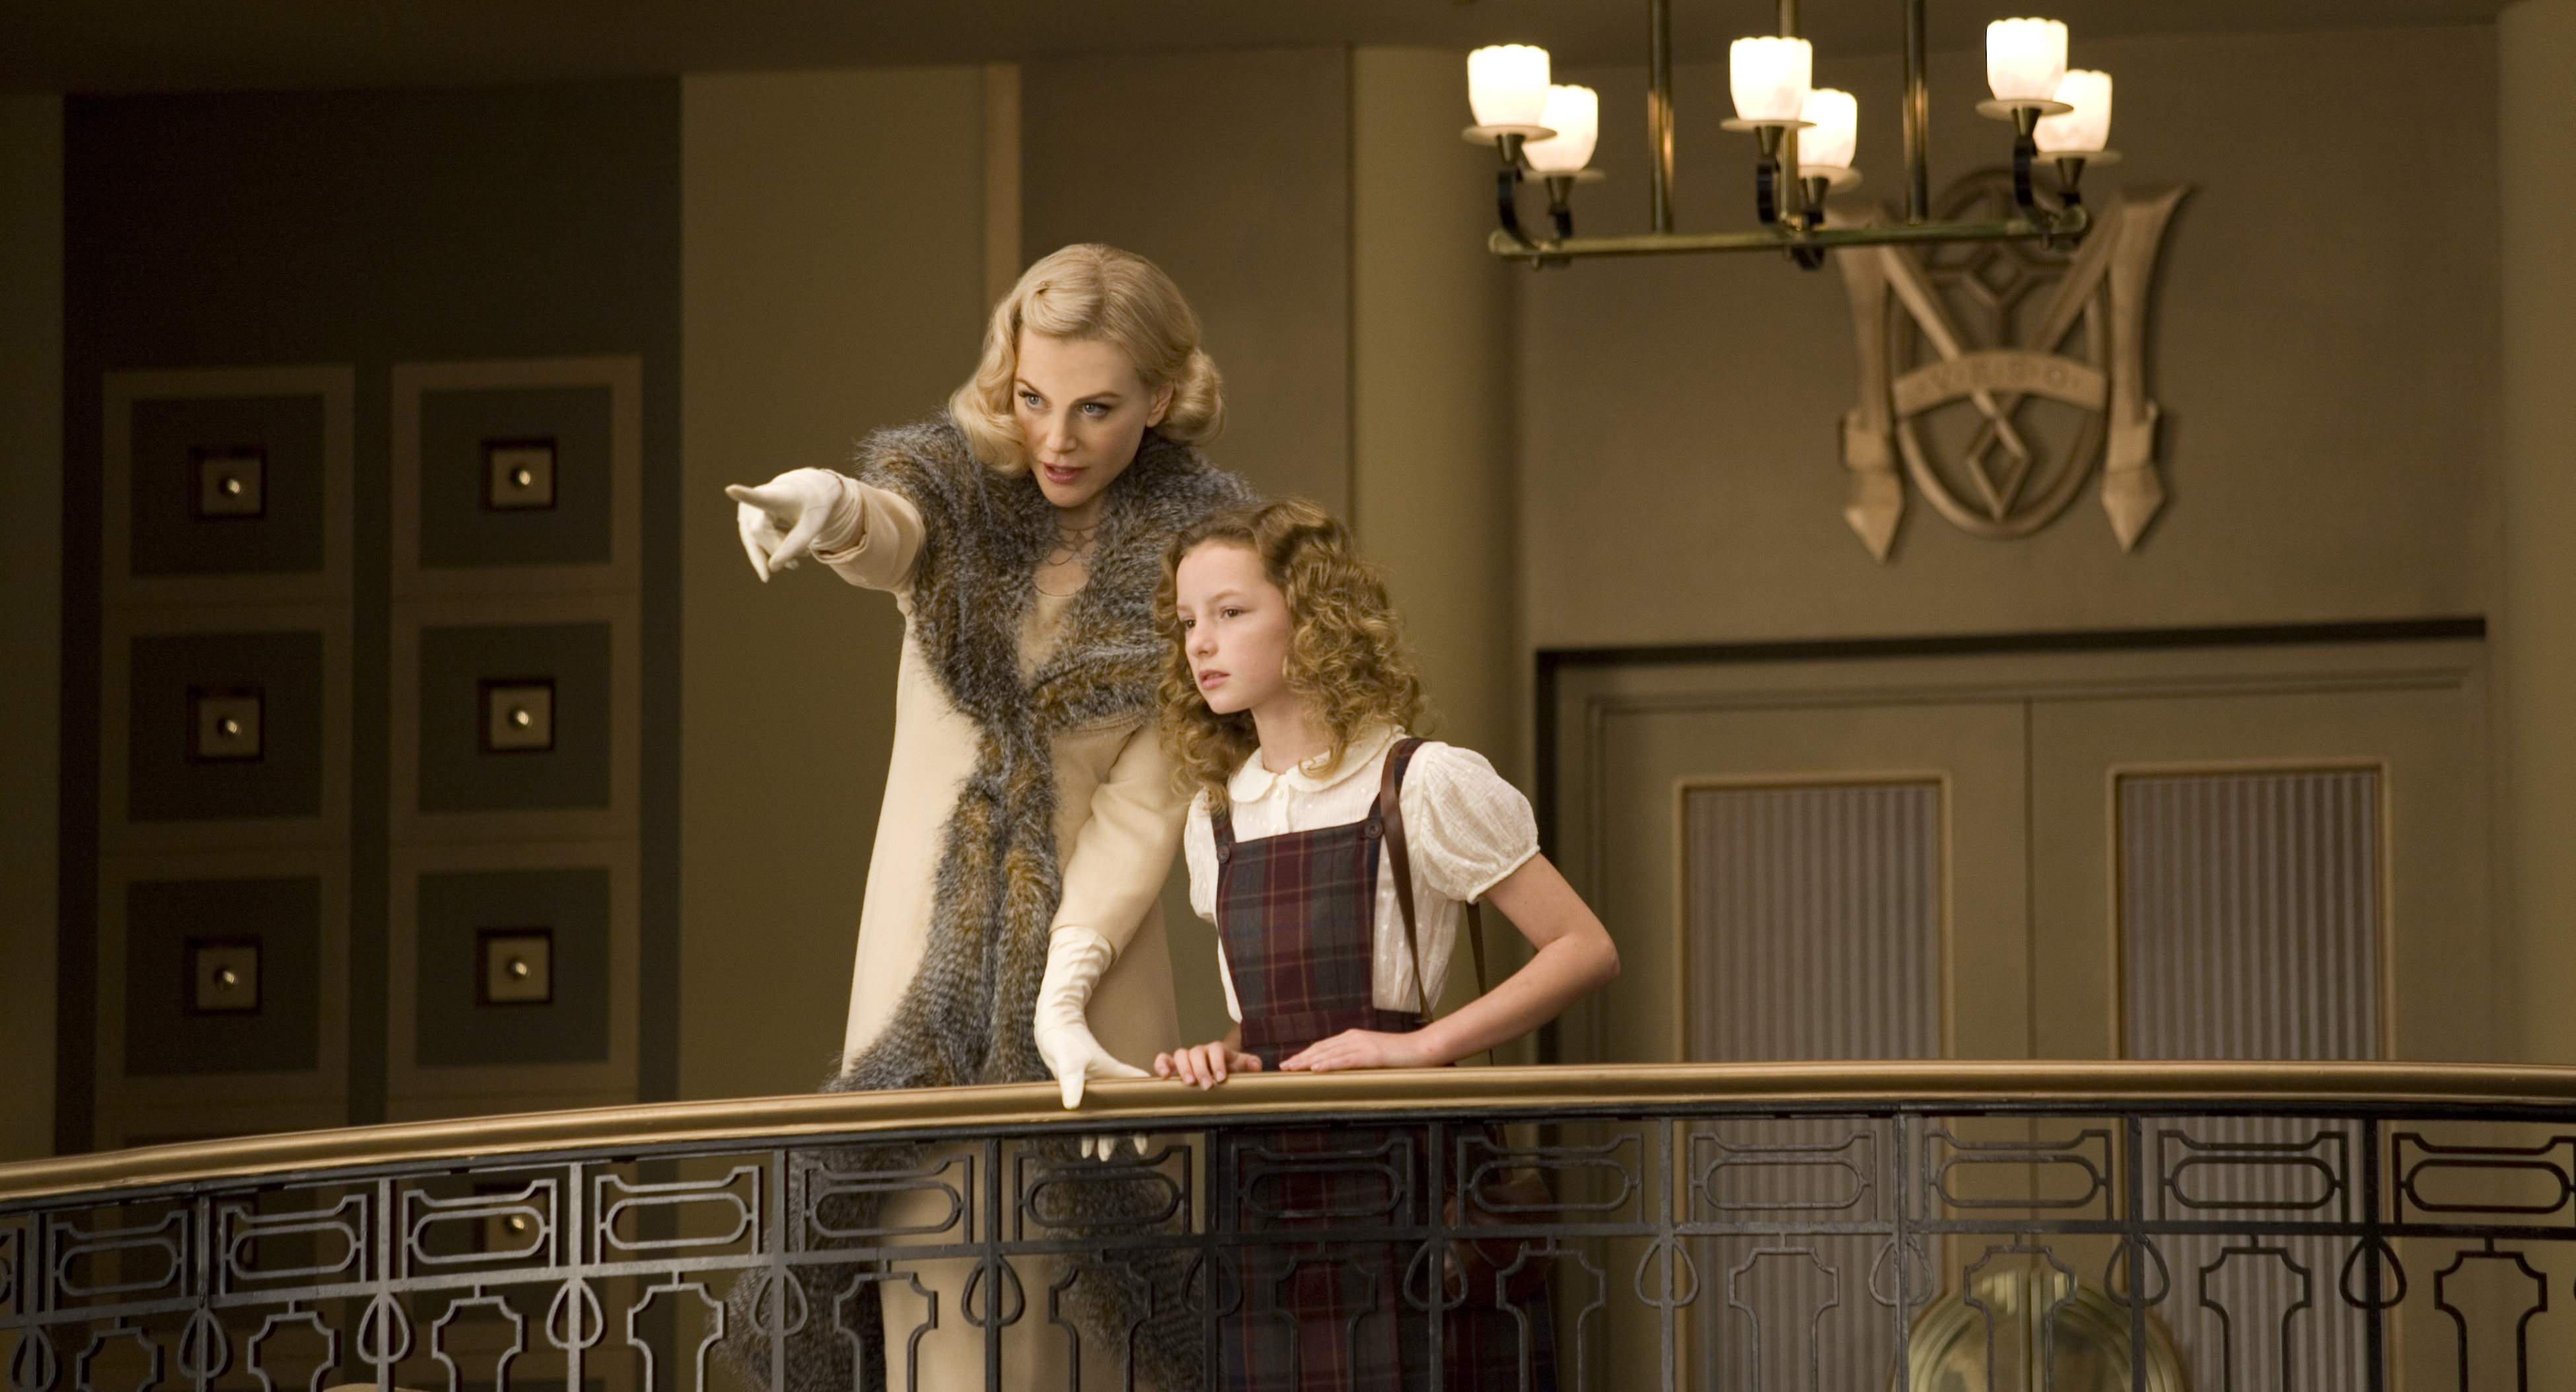 Dakota Blue Richards stars as Lyra and Nicole Kidman as Mrs. Coulter in New Line Cinema's release of Chris Weitz's THE GOLDEN COMPASS.